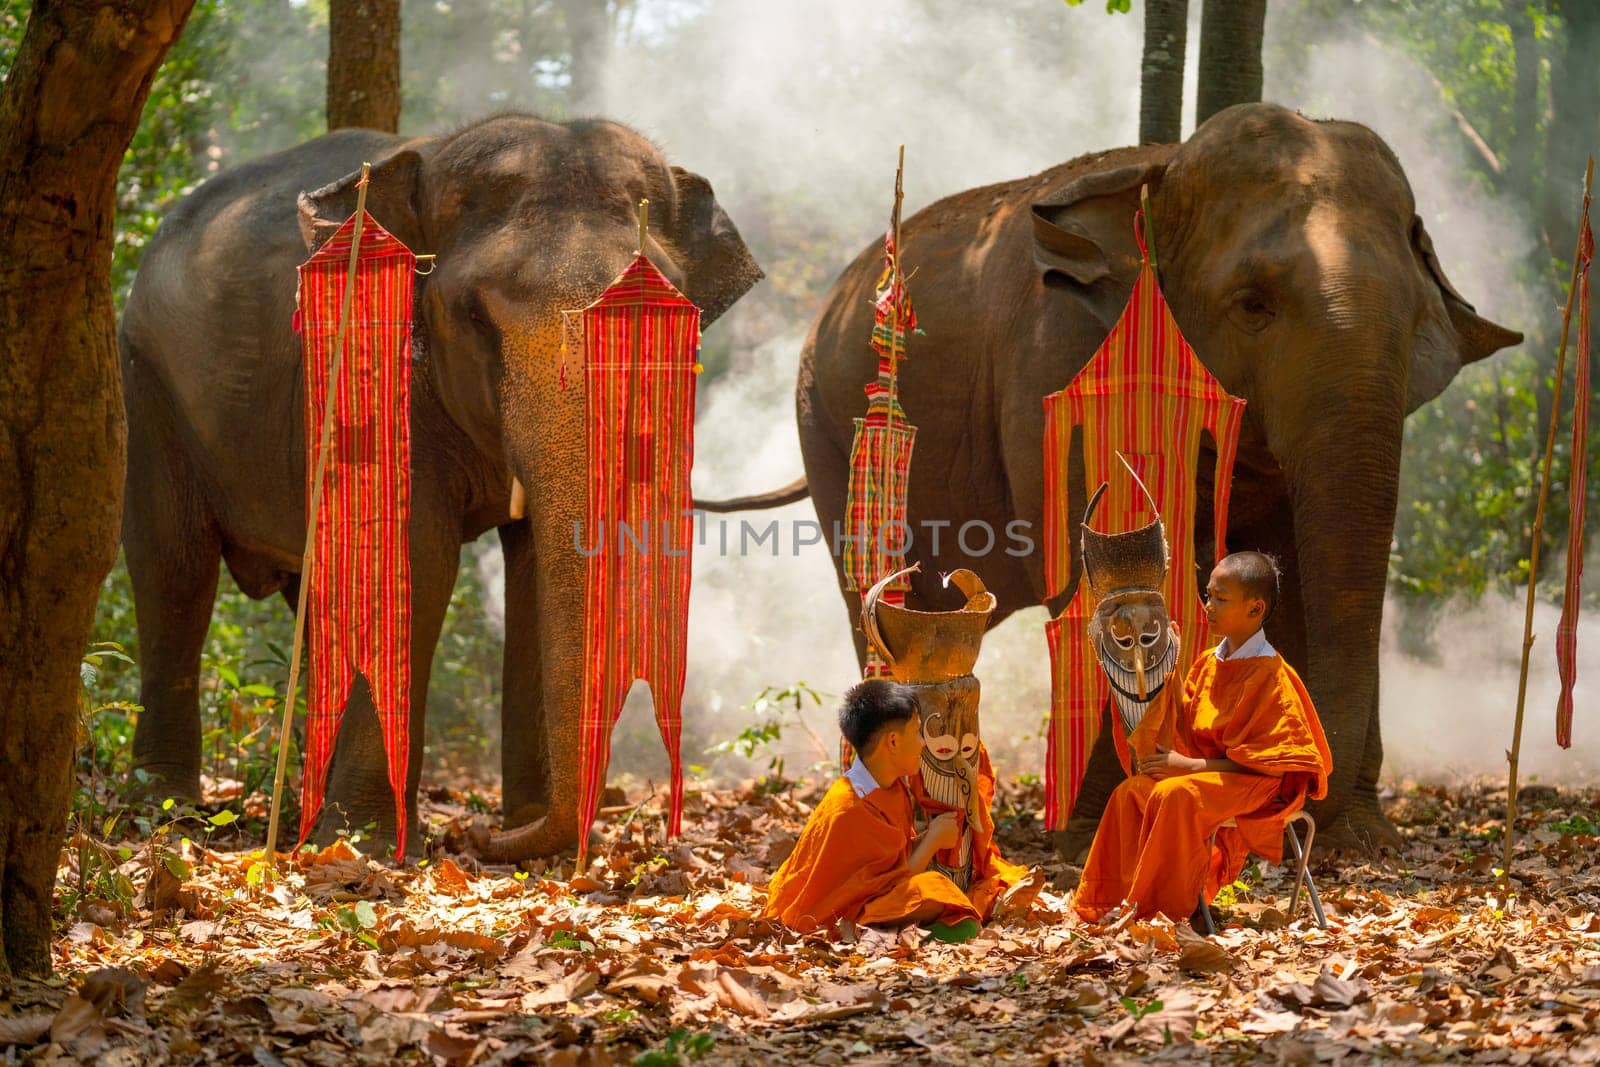 Two boys with Pee Ta Khon dress hold mask and talk together in front of elephant and traditional flags on background in forest.